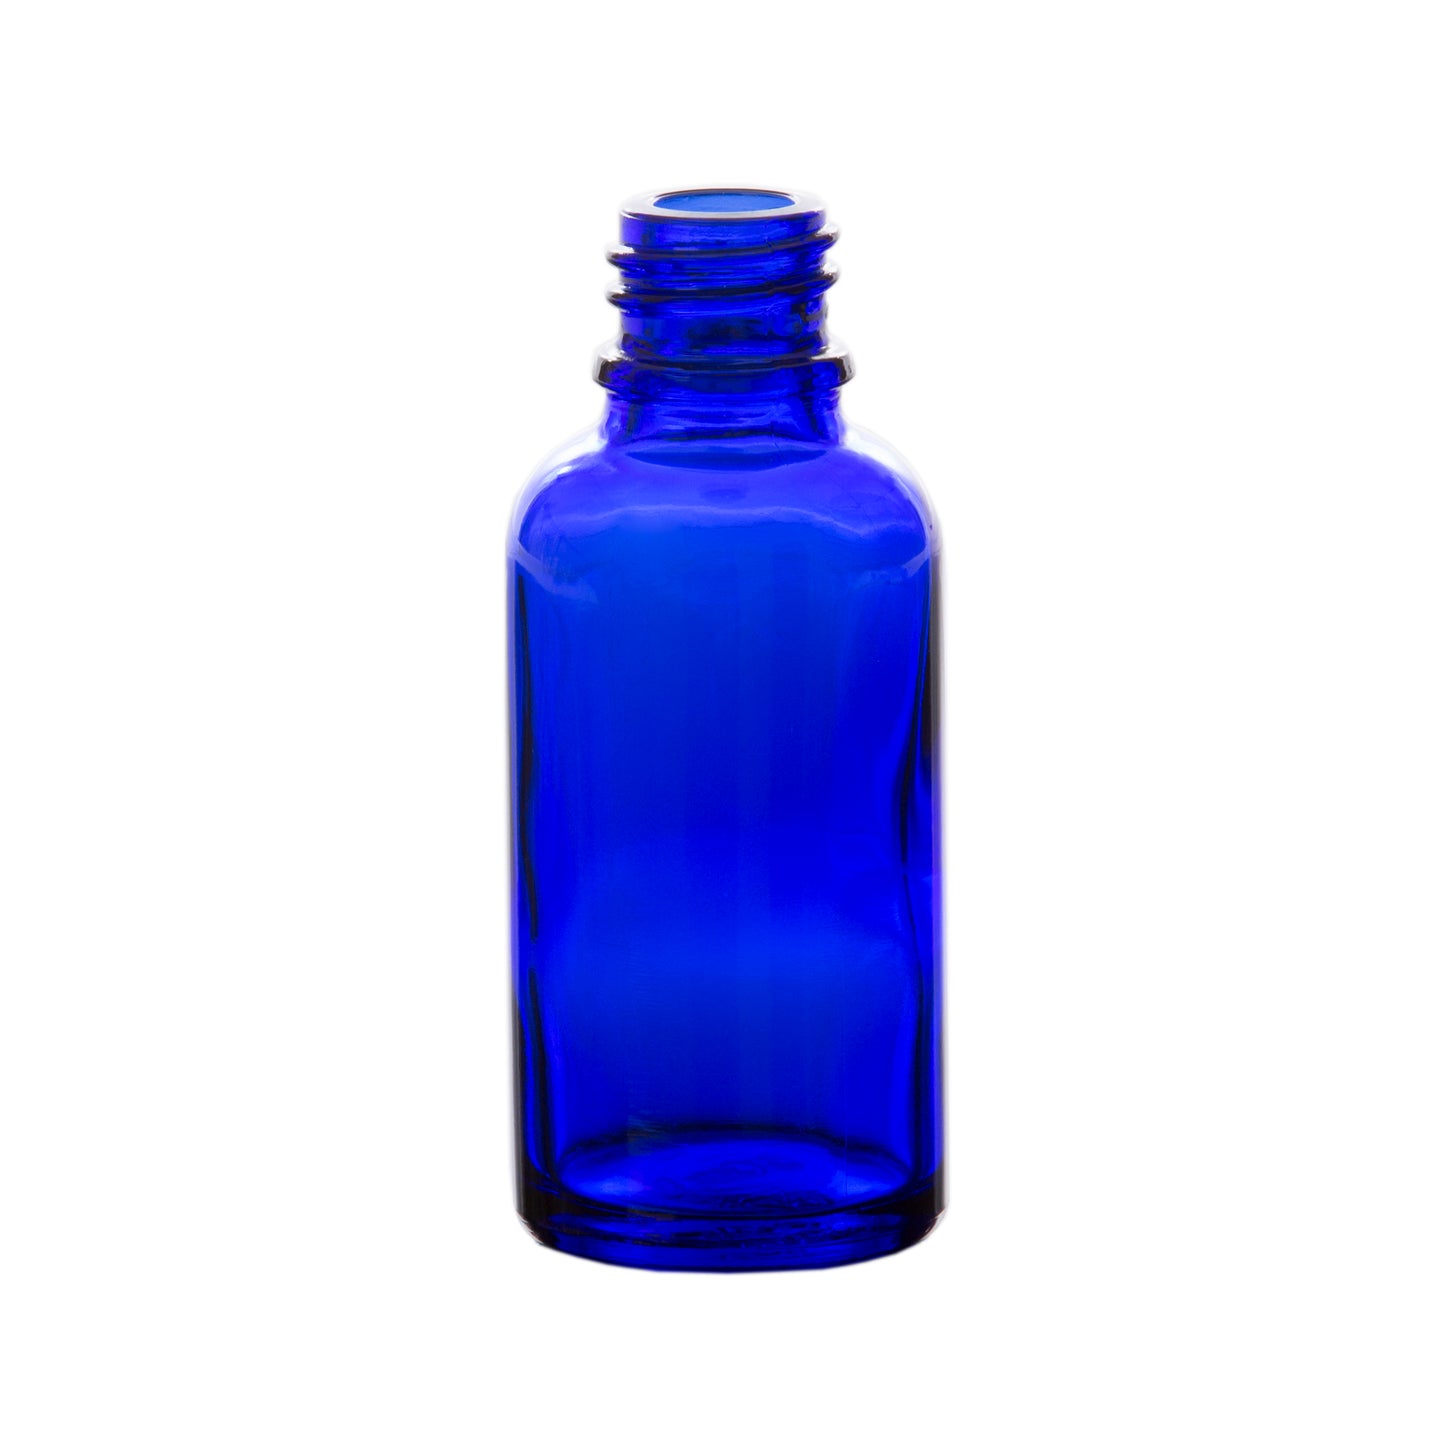 30 ml Blue Glass Essential Oil Bottle without Cap